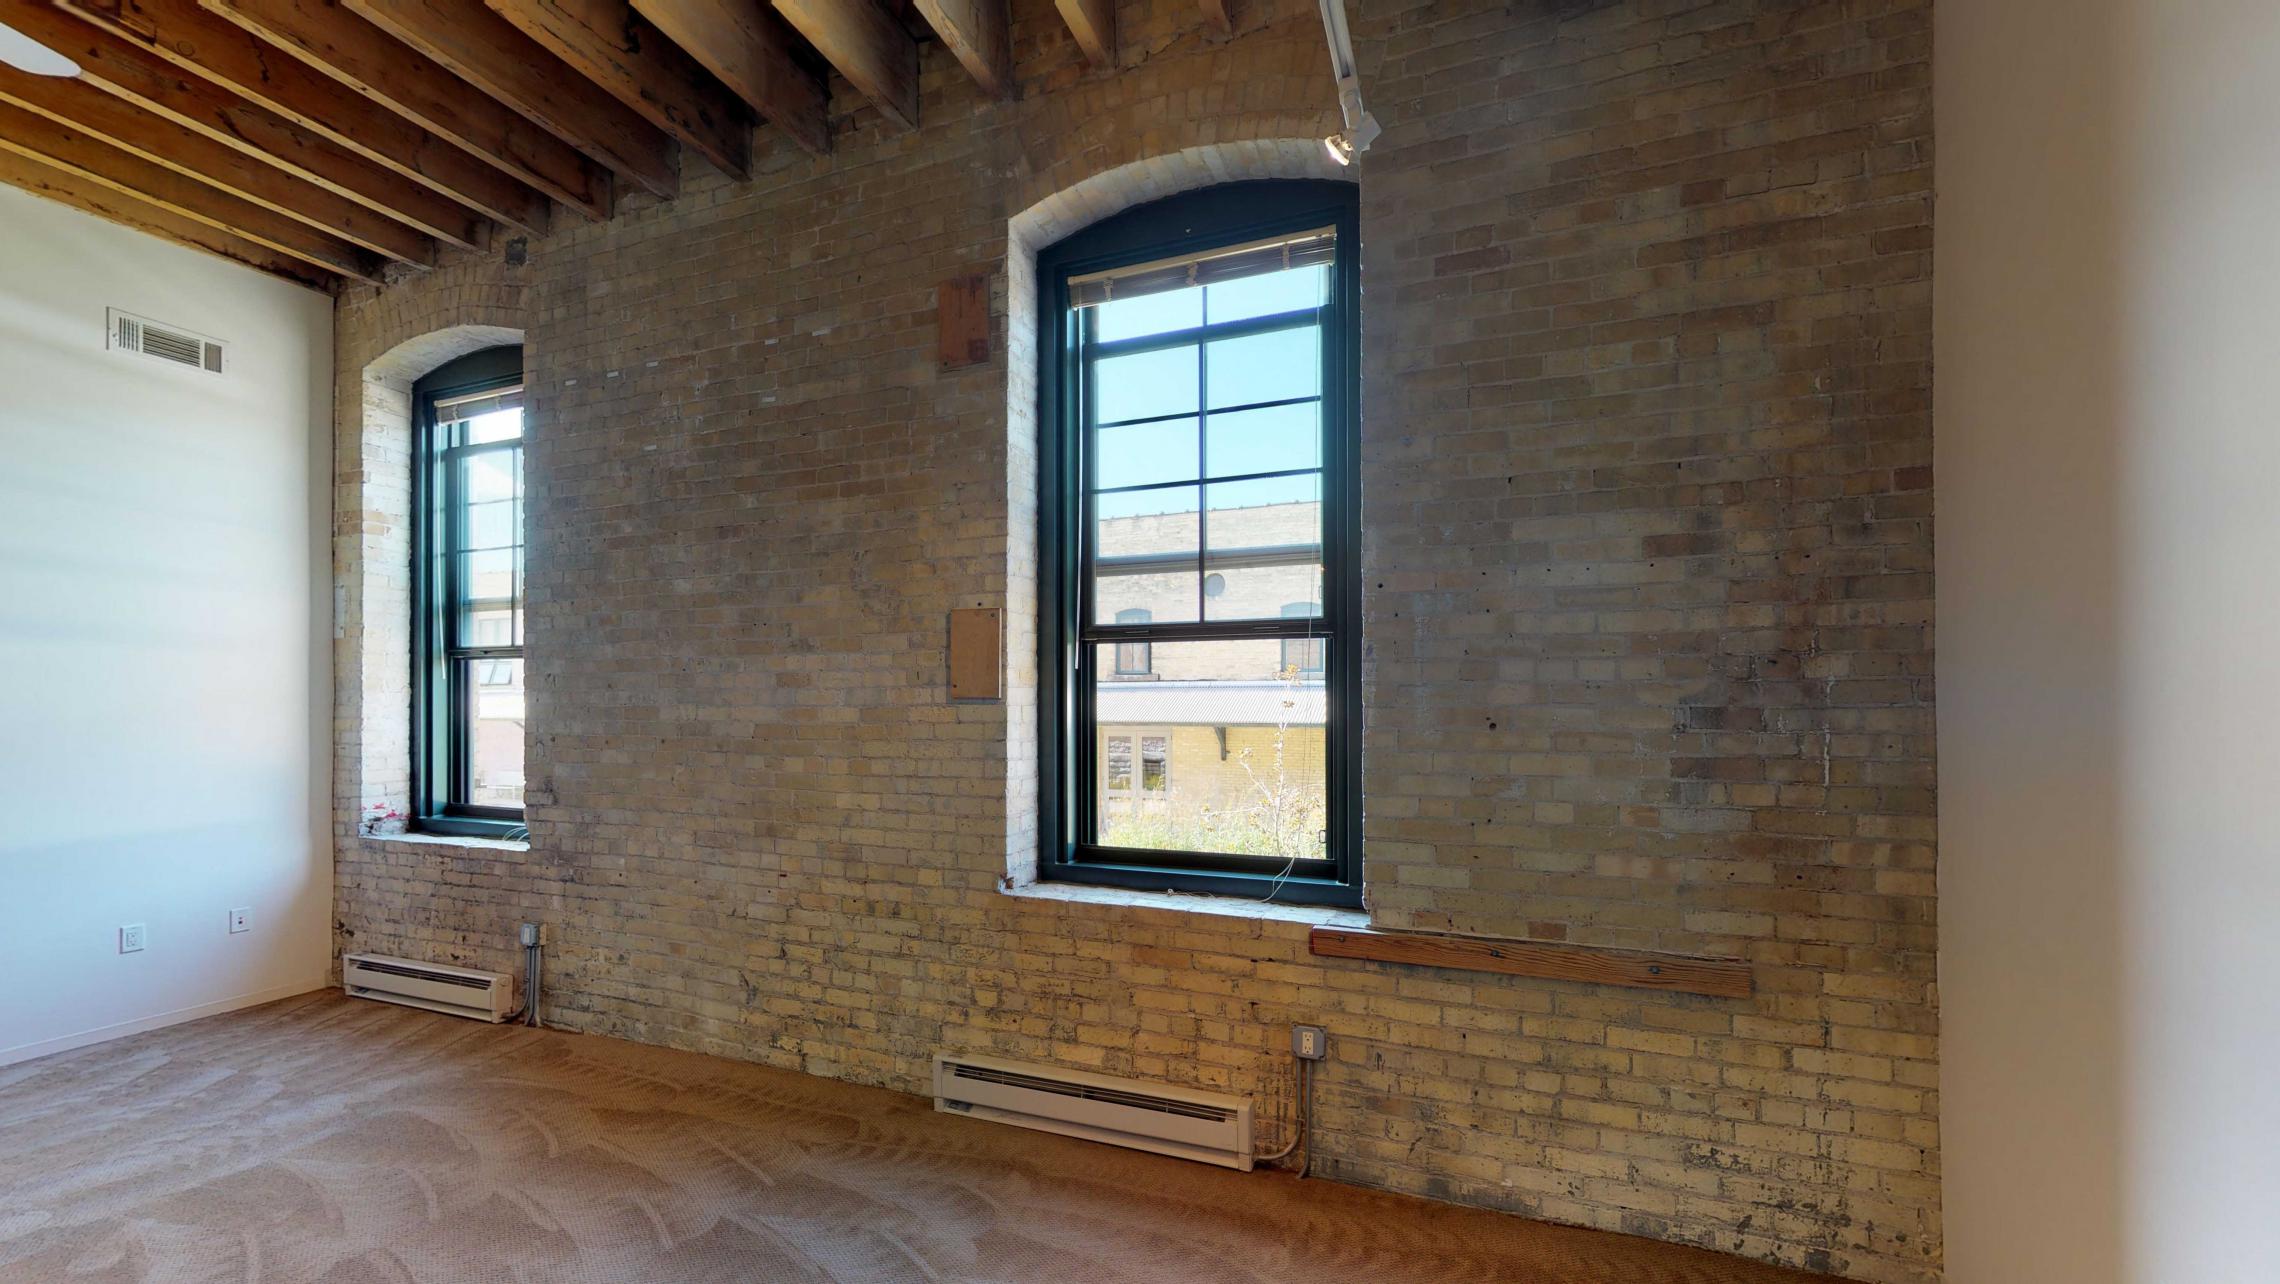 Tobacco-Lofts-Apartment-E210-exposed-brick-one-bedroom-historic-downtown-yards-Madison